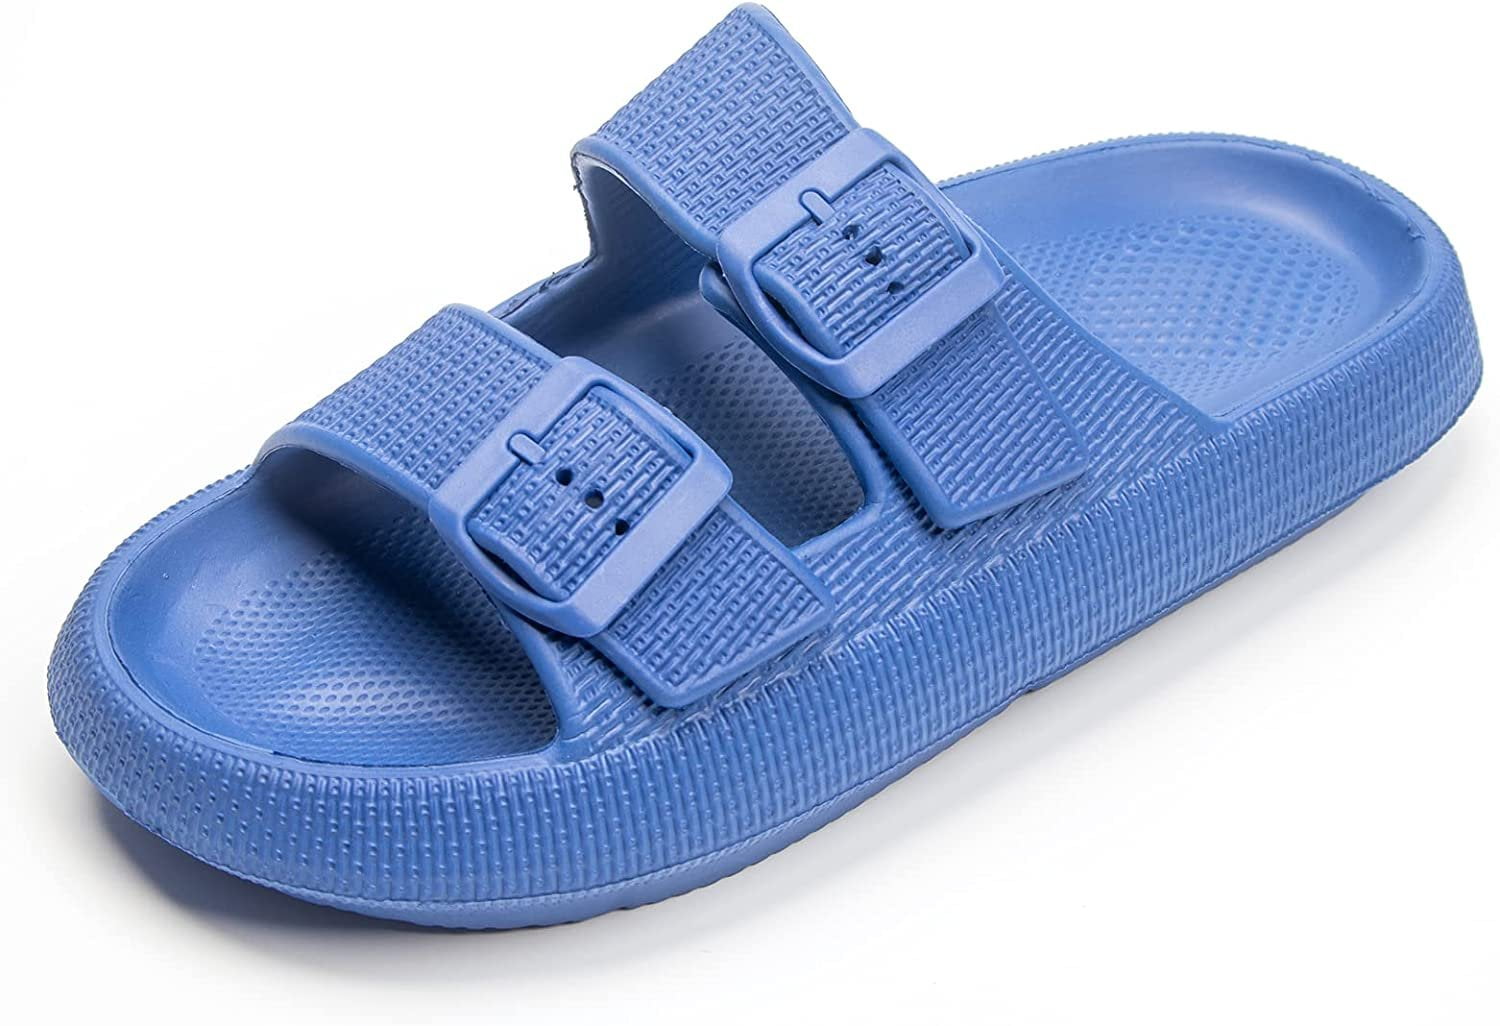 Womens Slip-on Casual, Cute Comfortable Slippers for Summer Use or Outdoor adjustable buckle straps - Walmart.com